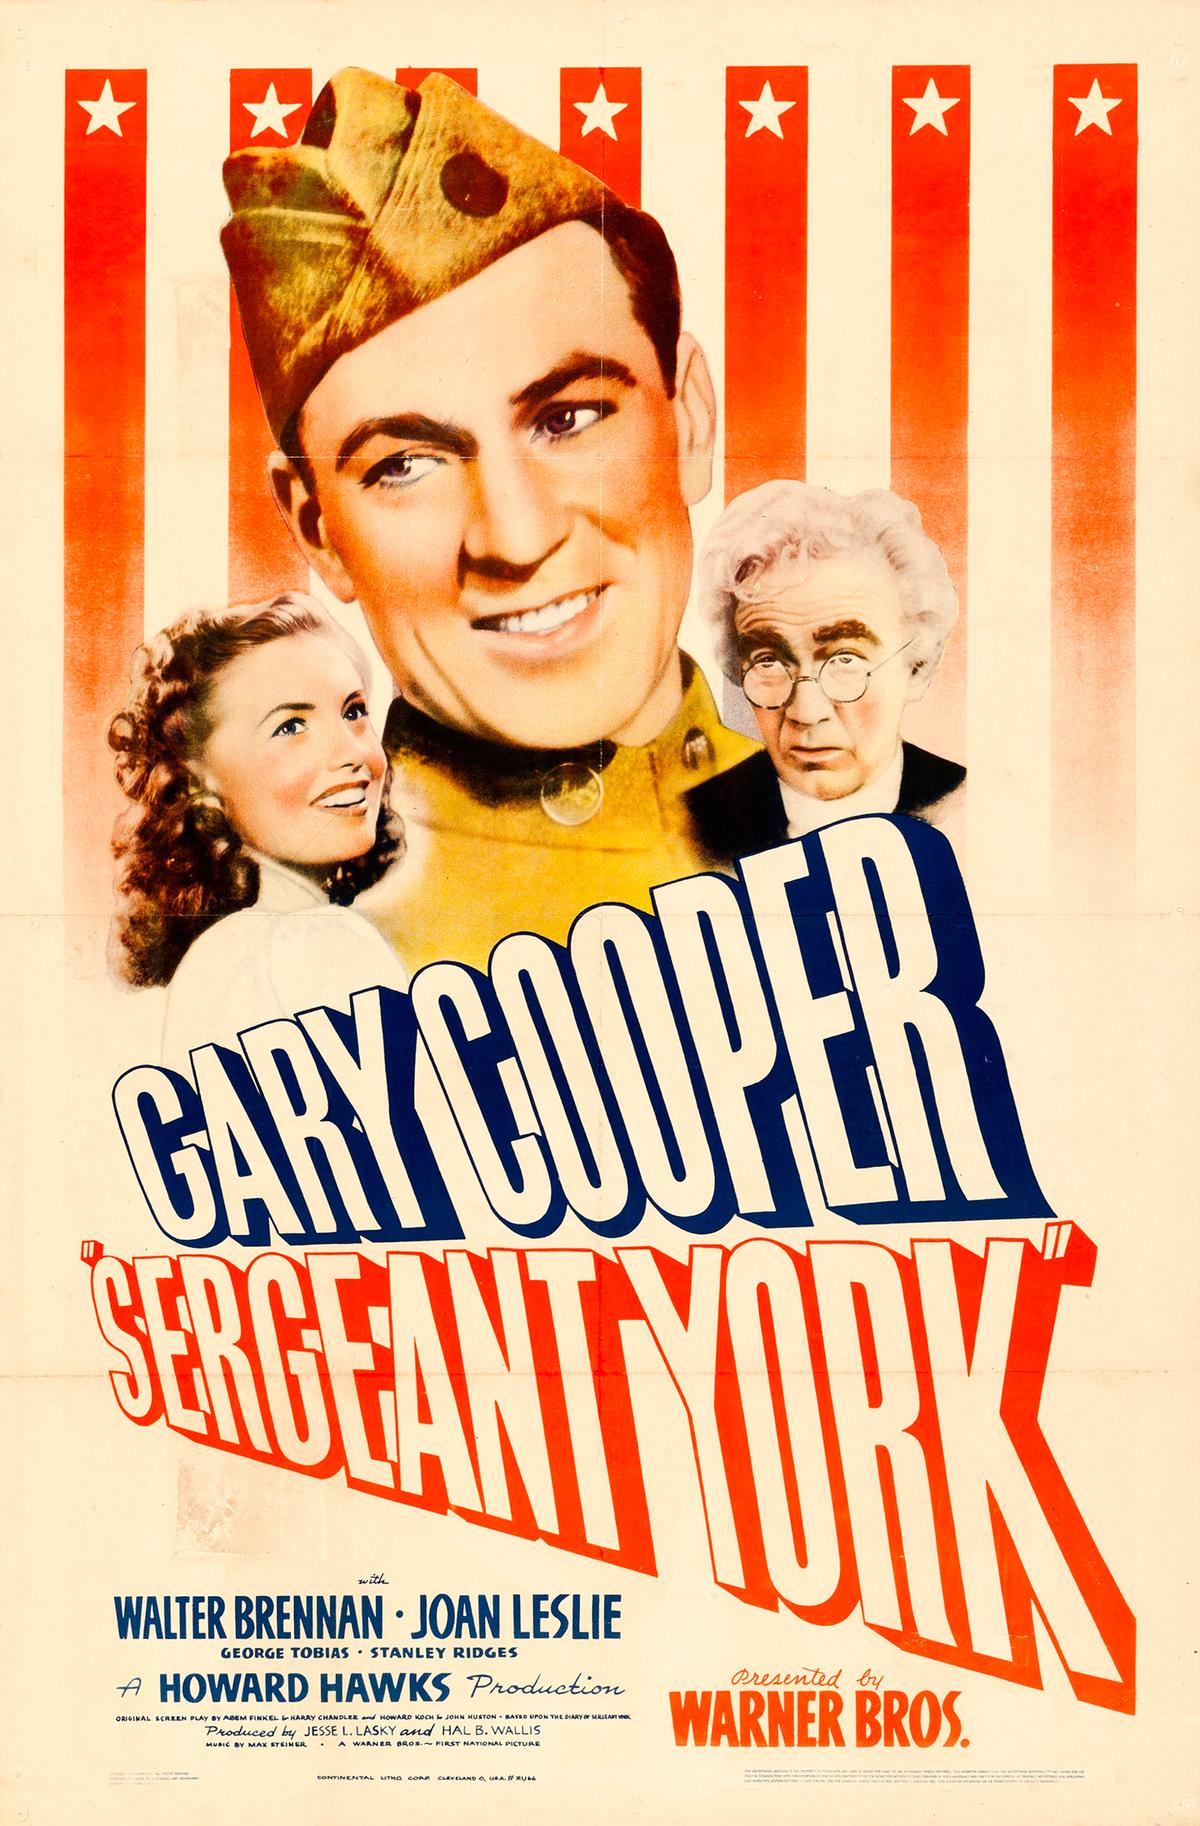 Theatrical release poster for the 1941 film "Sergeant York" featuring Gary Cooper as Alvin York. (Warner Bros.)